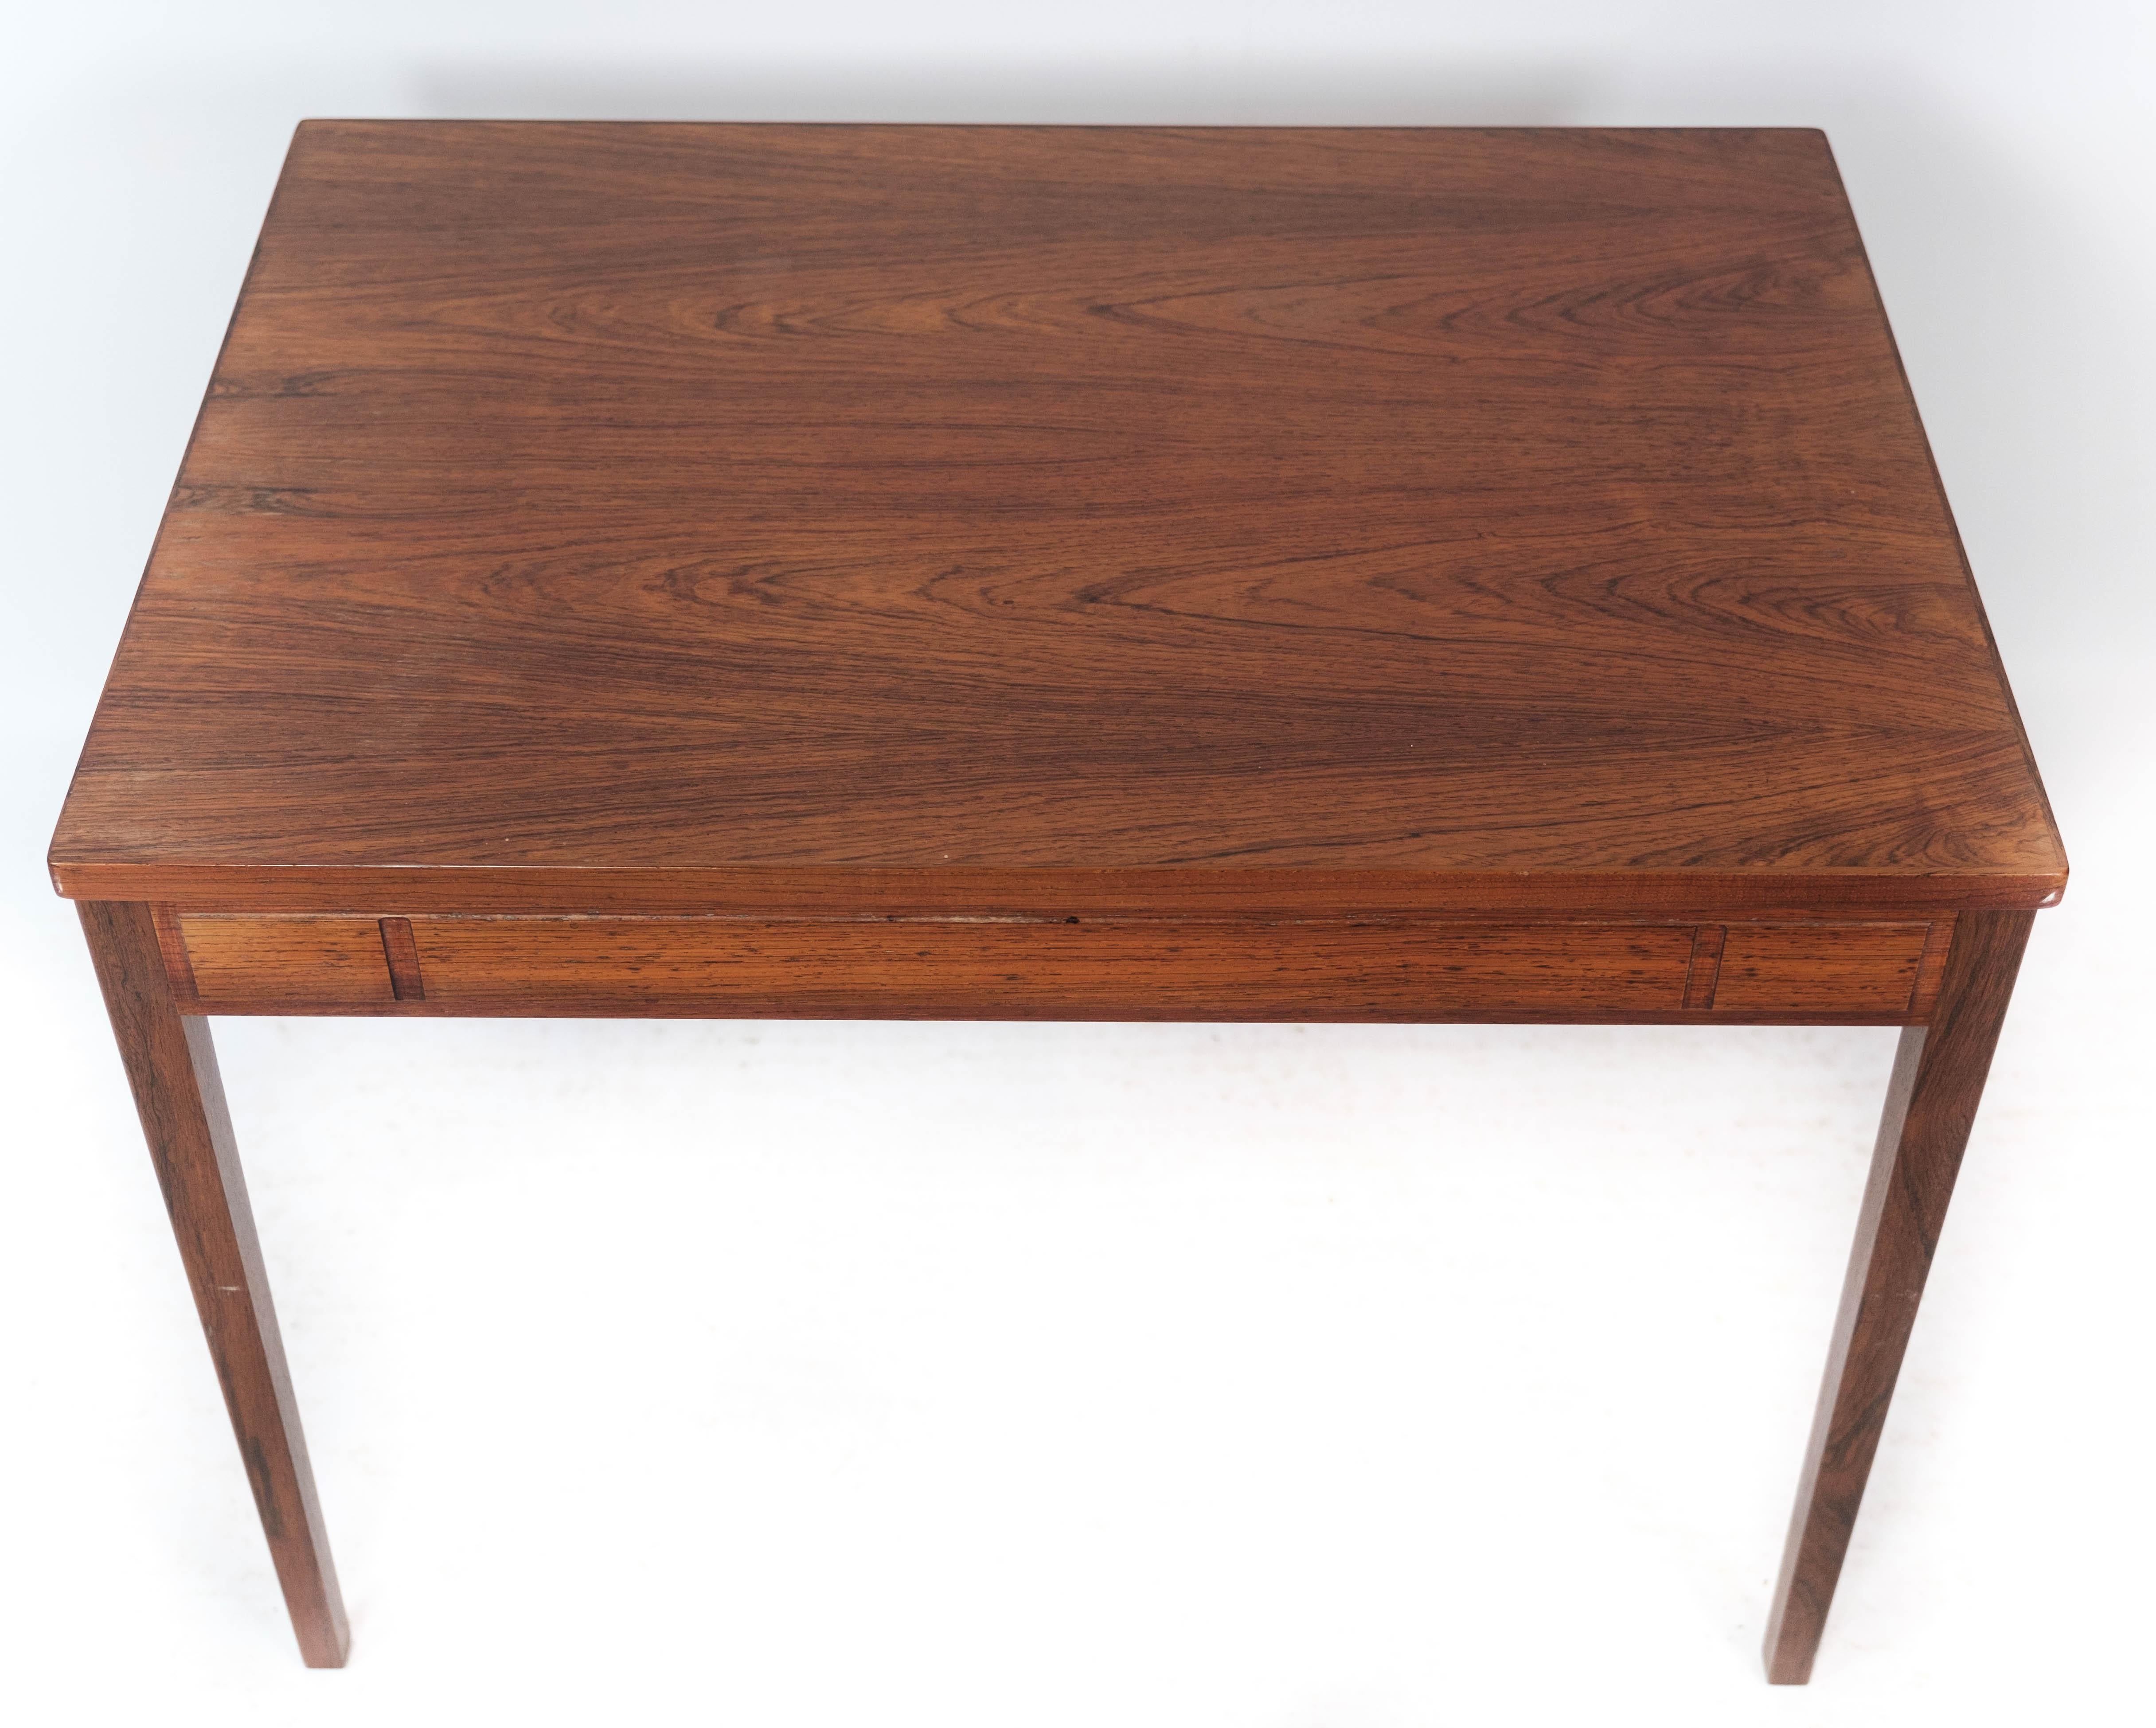 
The side table crafted from rosewood and showcasing Danish design from the 1960s is a striking example of mid-century modern elegance.

Rosewood, prized for its rich hues and distinctive grain patterns, imbues the table with a sense of warmth and